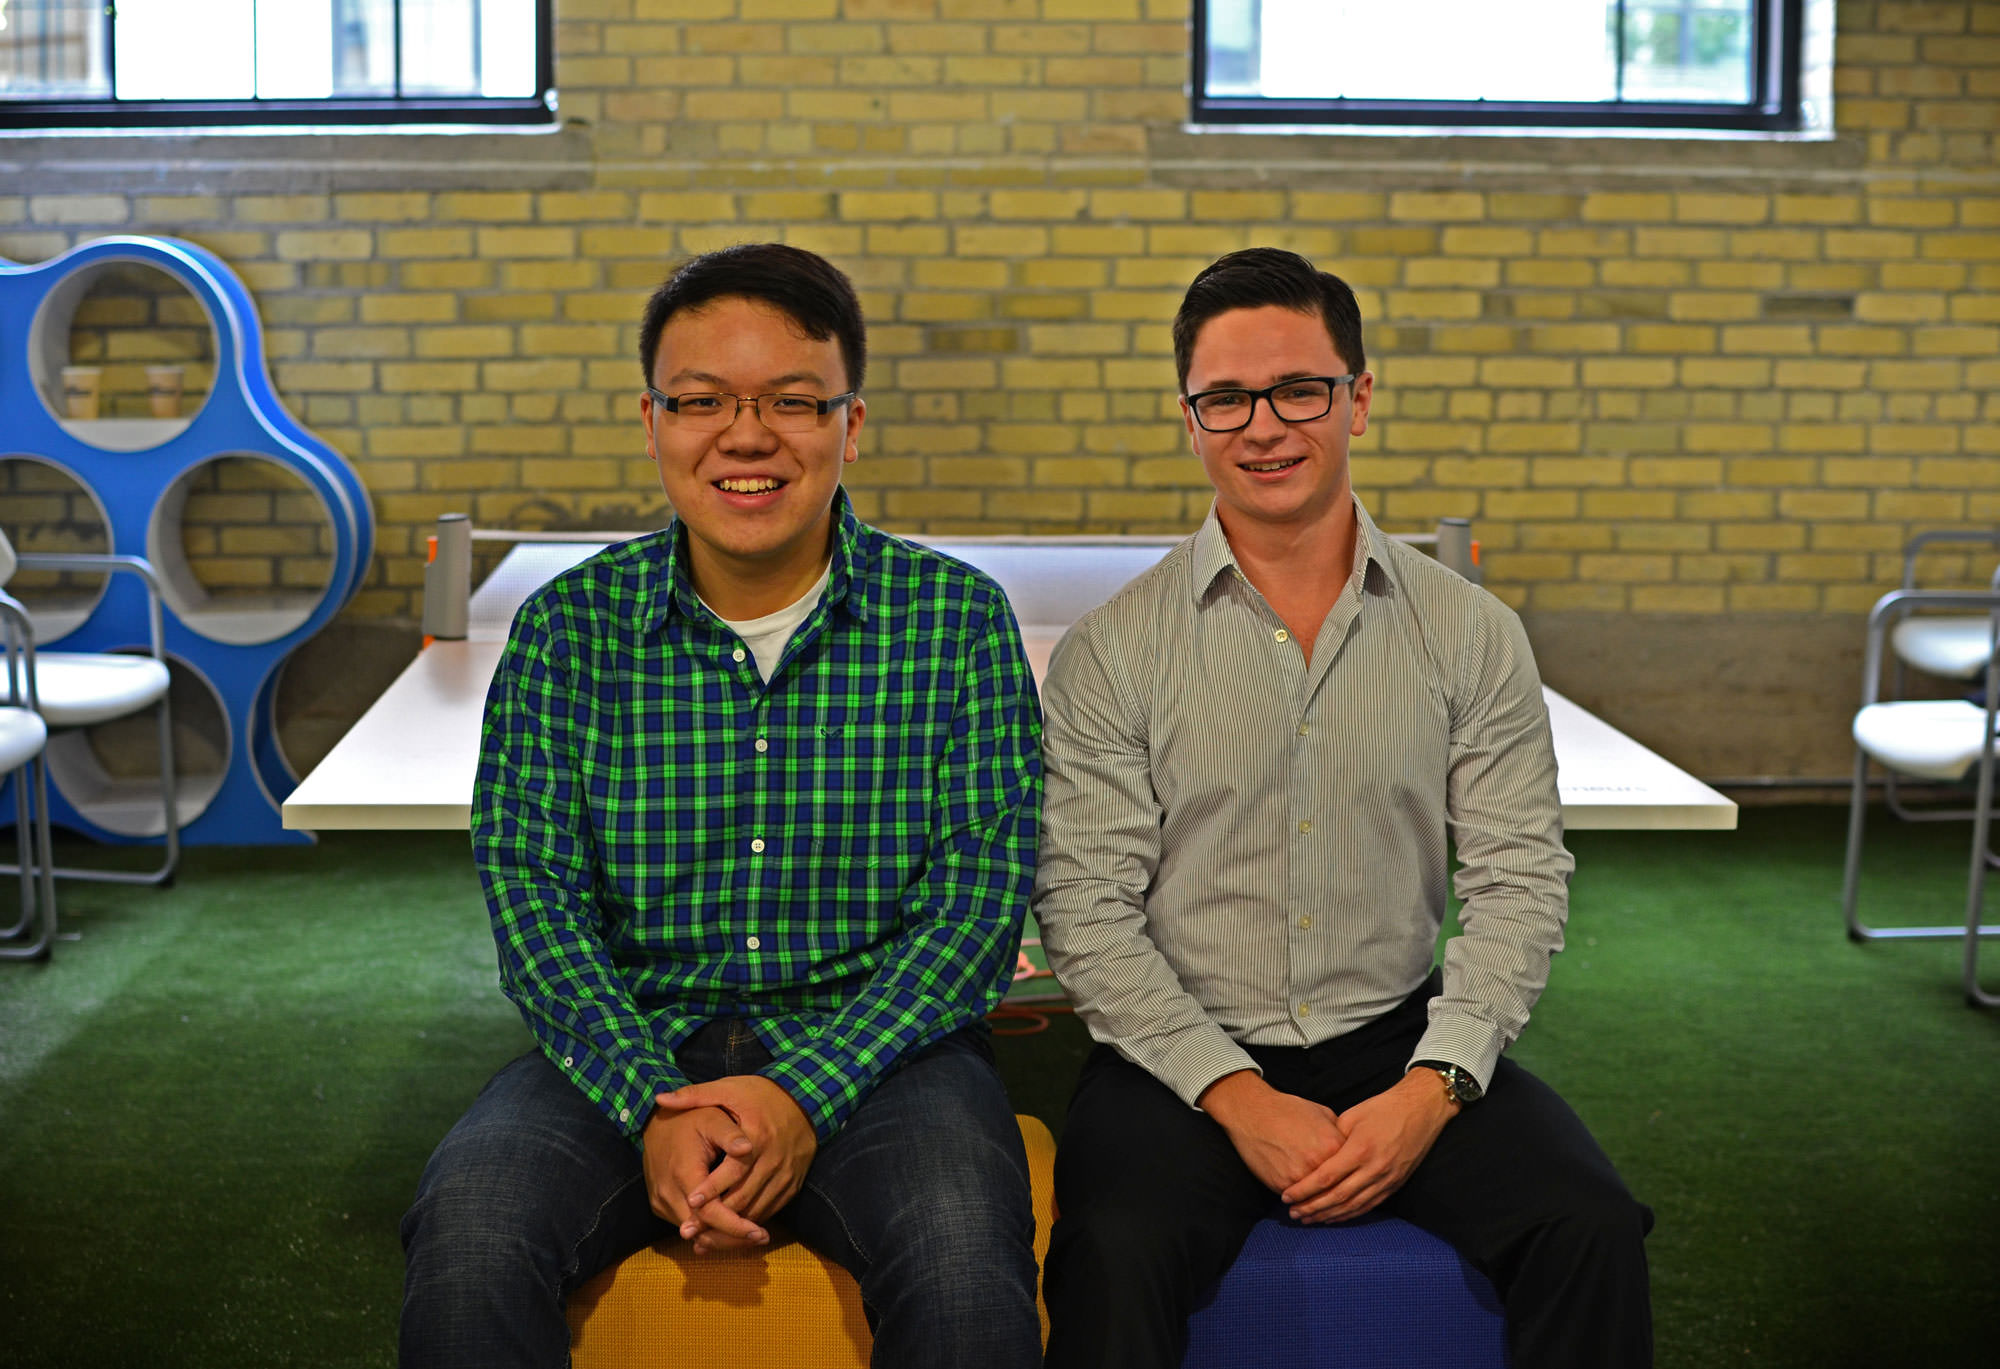 Teknically founders Brandon and Andrew in their new Google for Entrepreneurs space at Communitech.